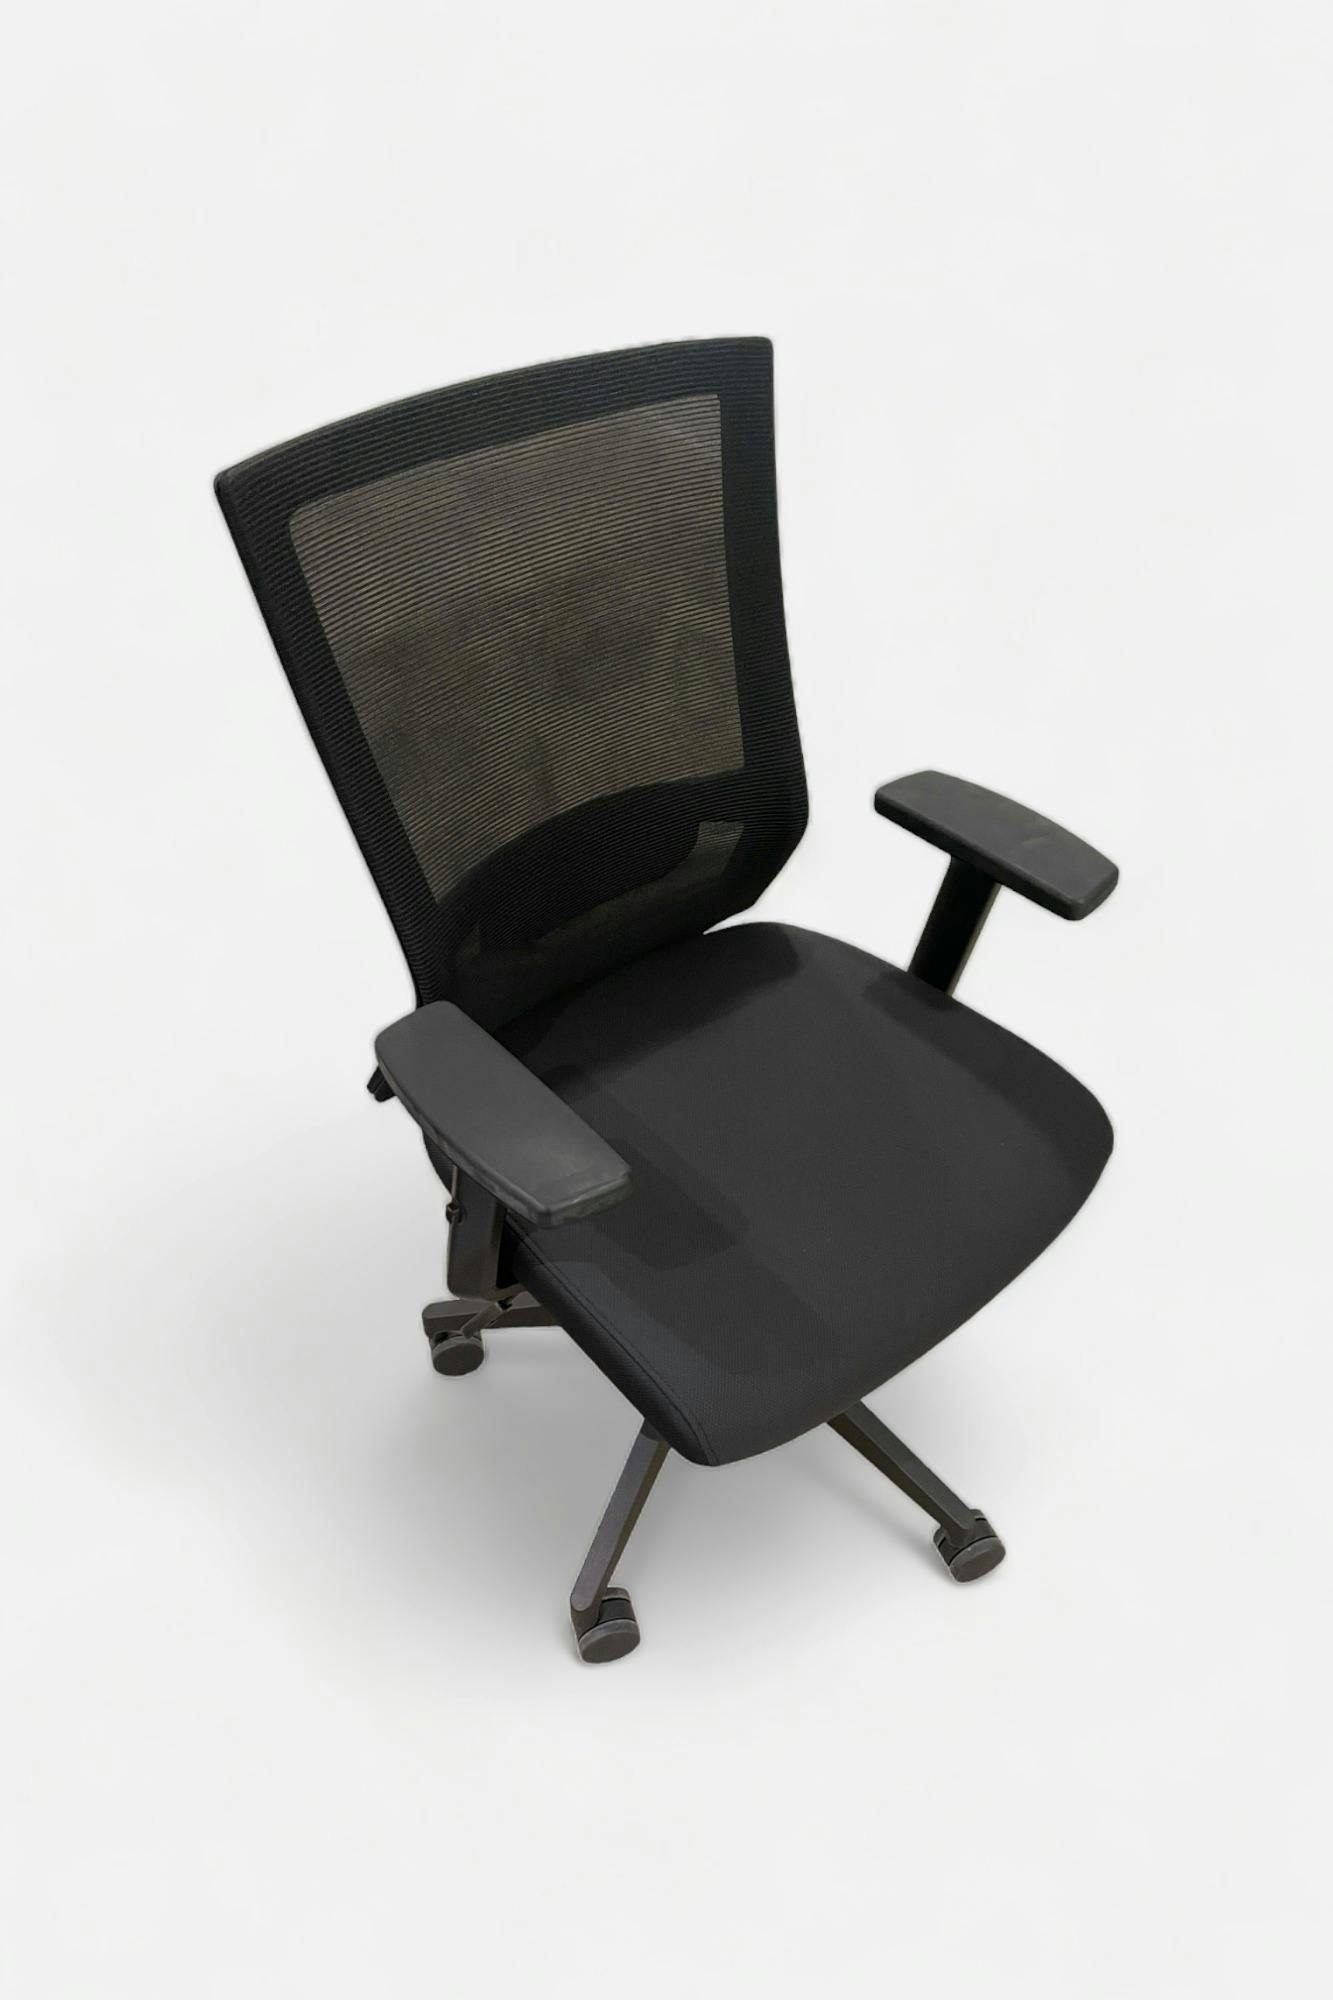 Black office chair - Relieve Furniture